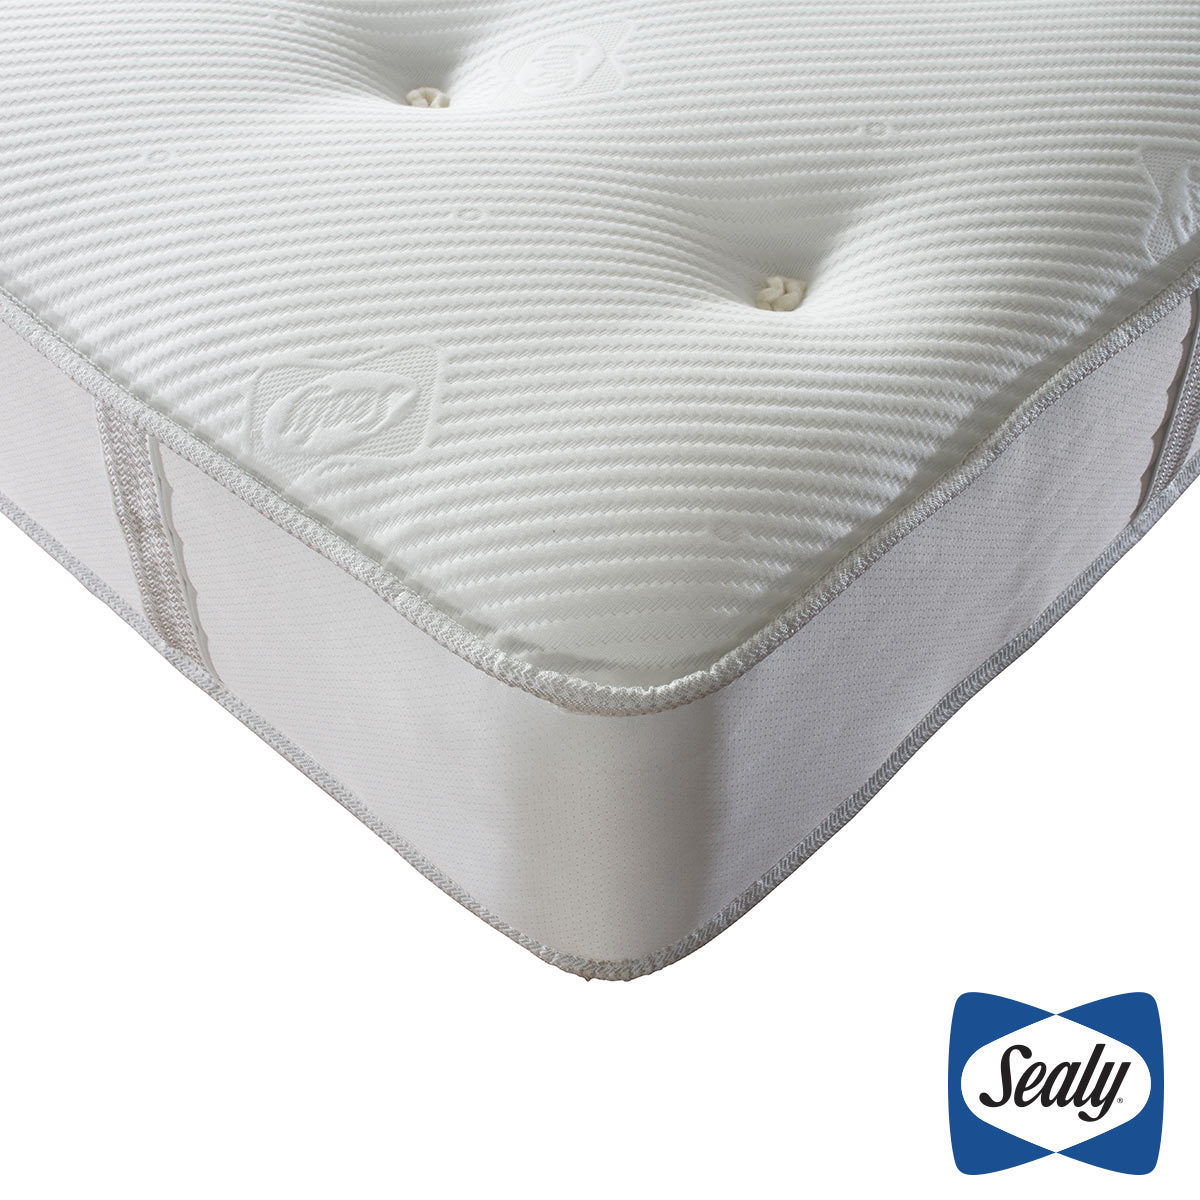 Sealy 1000 Deluxe Pocket Memory Tufted Mattress, Double